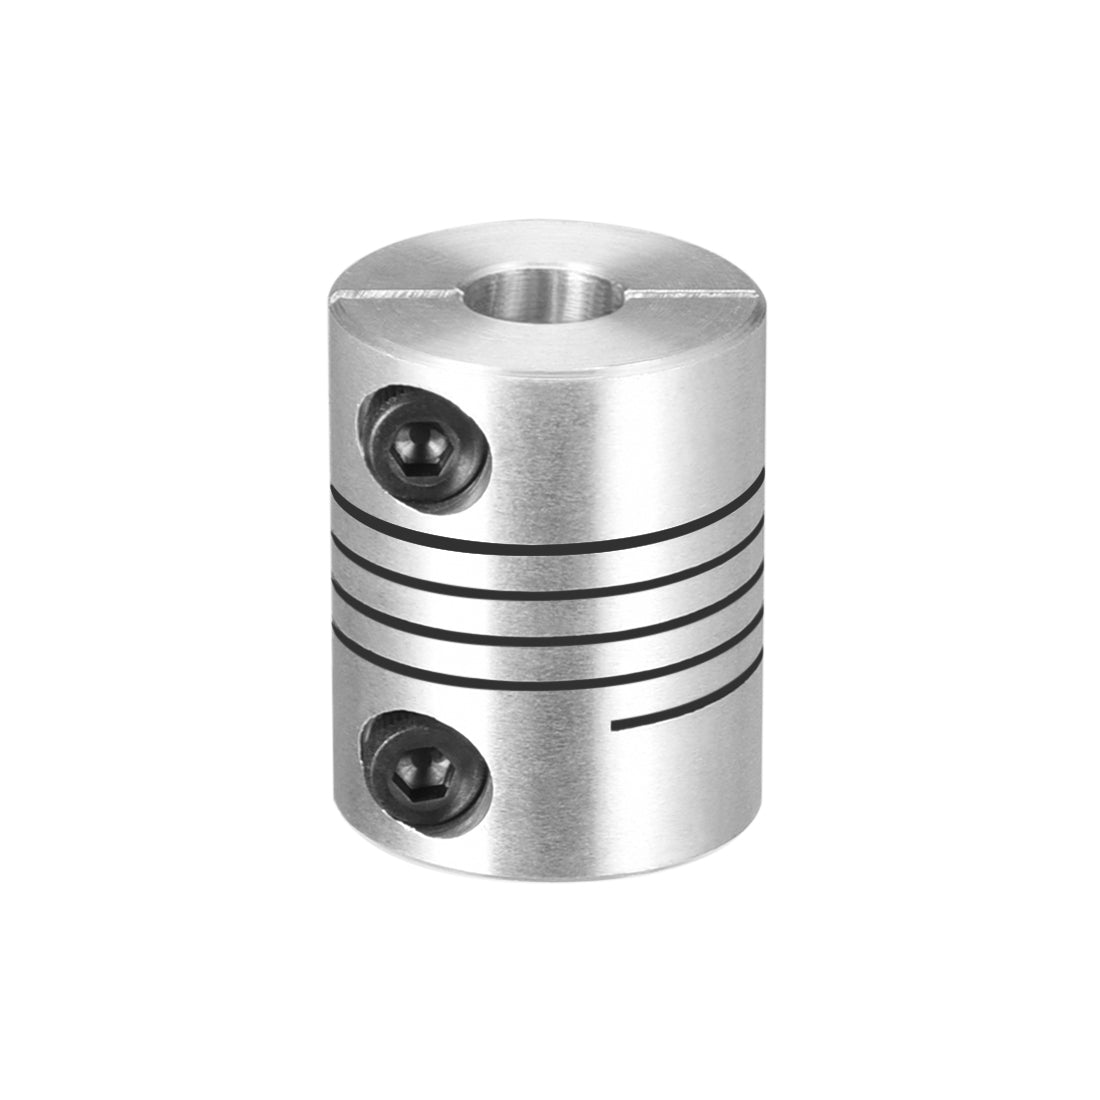 uxcell Uxcell Motor Shaft 6.35mm to 8mm Helical Beam Coupler Coupling 20mm Dia 25mm Length